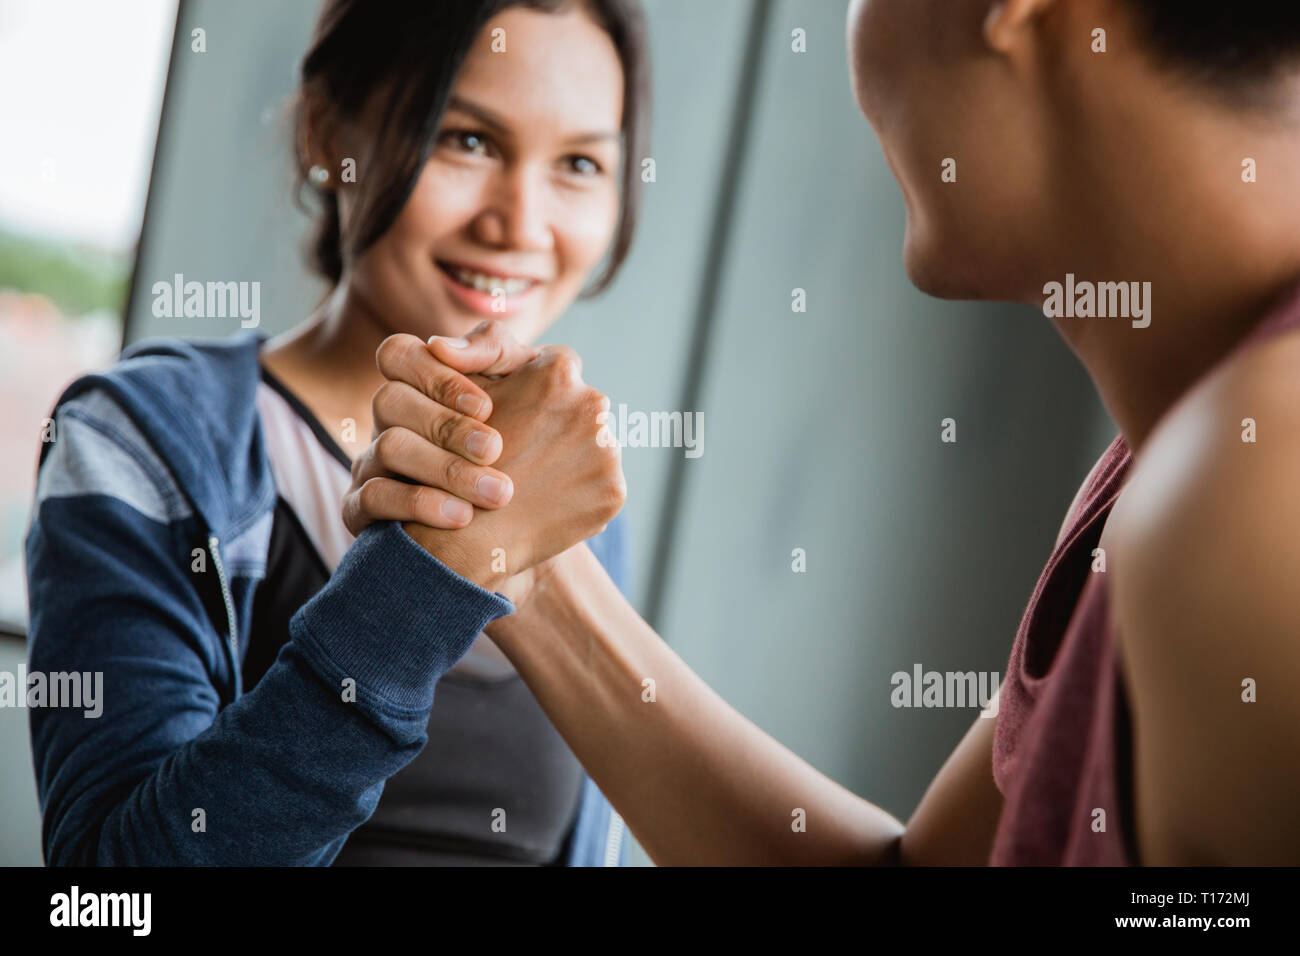 gesture of sport shake hand in the gym Stock Photo